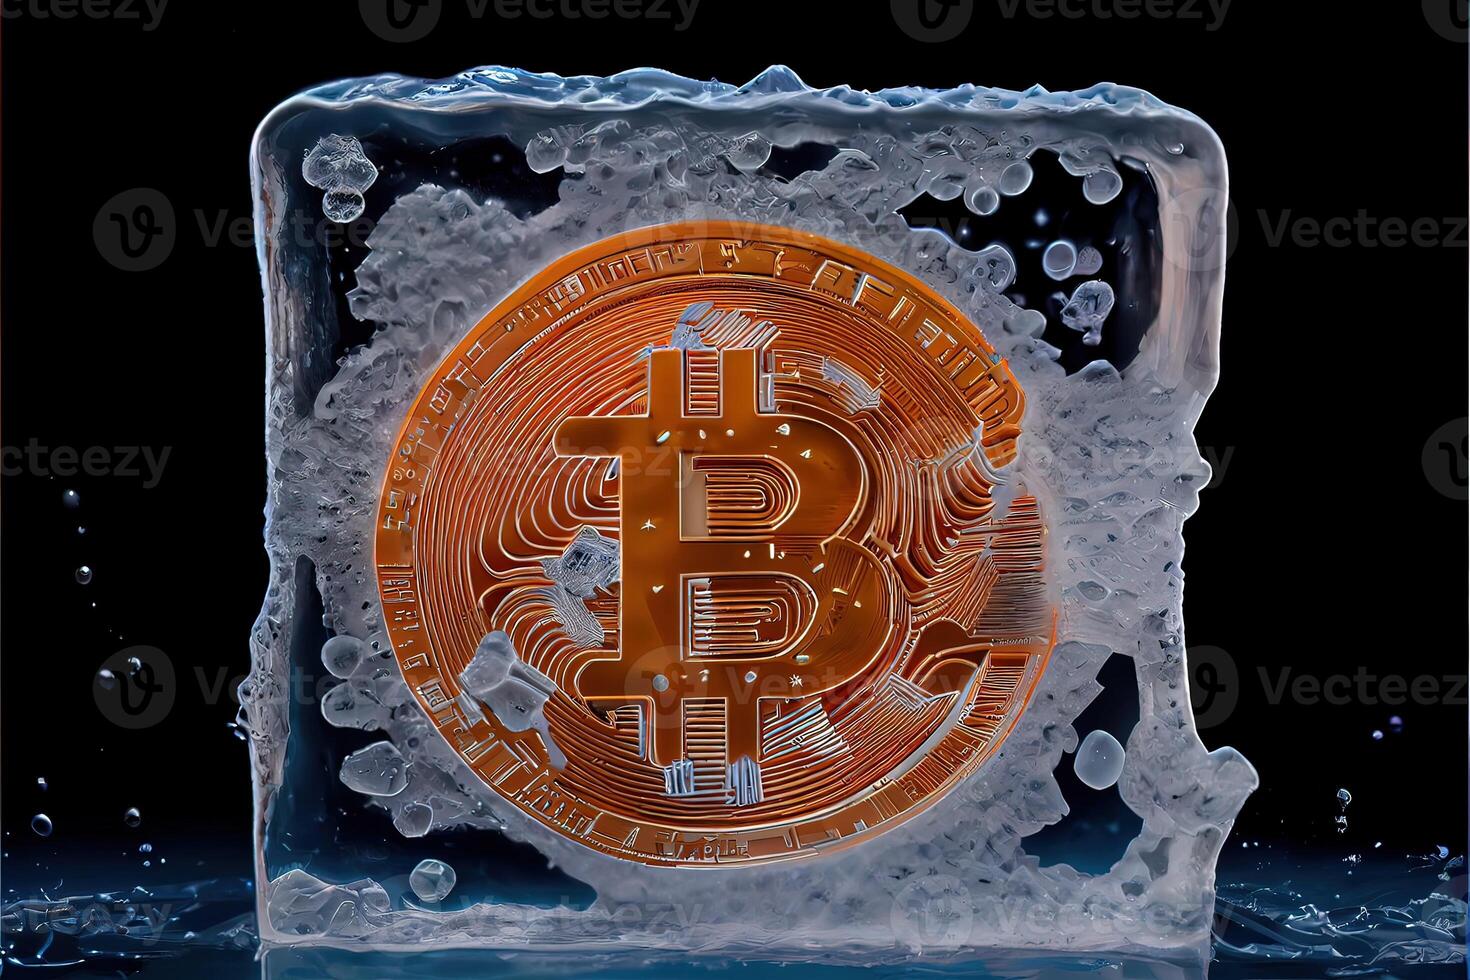 illustration of frozen bitcoin, cold and snow. Bit coin symbol in ice and snow photo